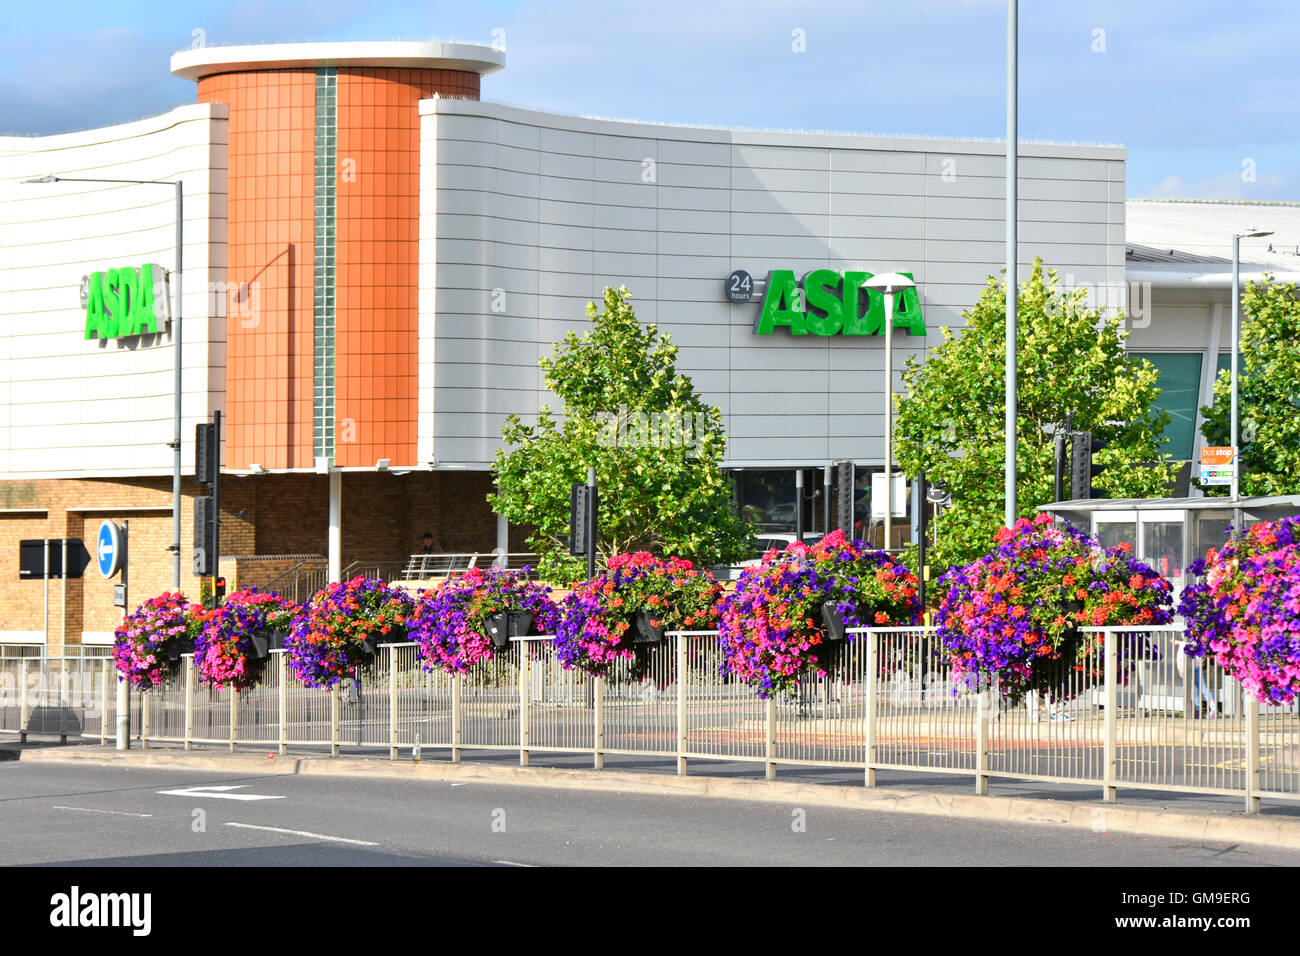 Twenty four hour Asda Supermarket shopping centre in Rugby town centre with summer flower displays along dual carriageway Warwickshire England UK Stock Photo